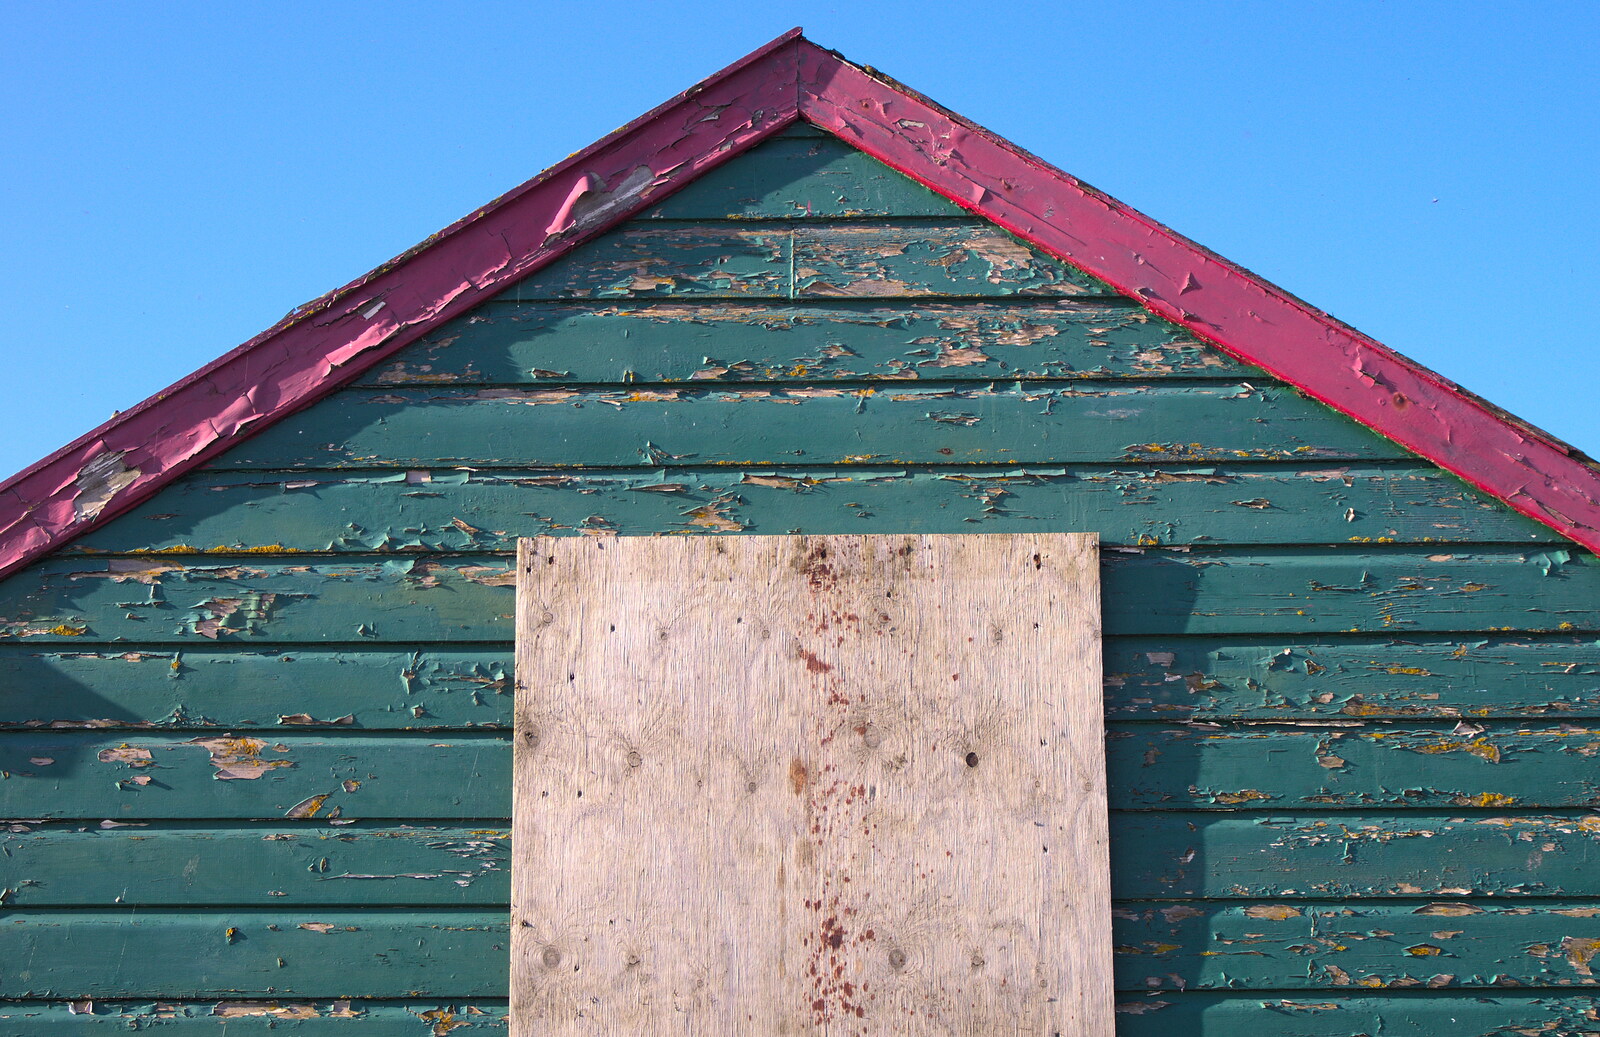 Peeling paint on a beach hut from A Busy Day, Southwold and Thornham, Suffolk - 11th November 2012